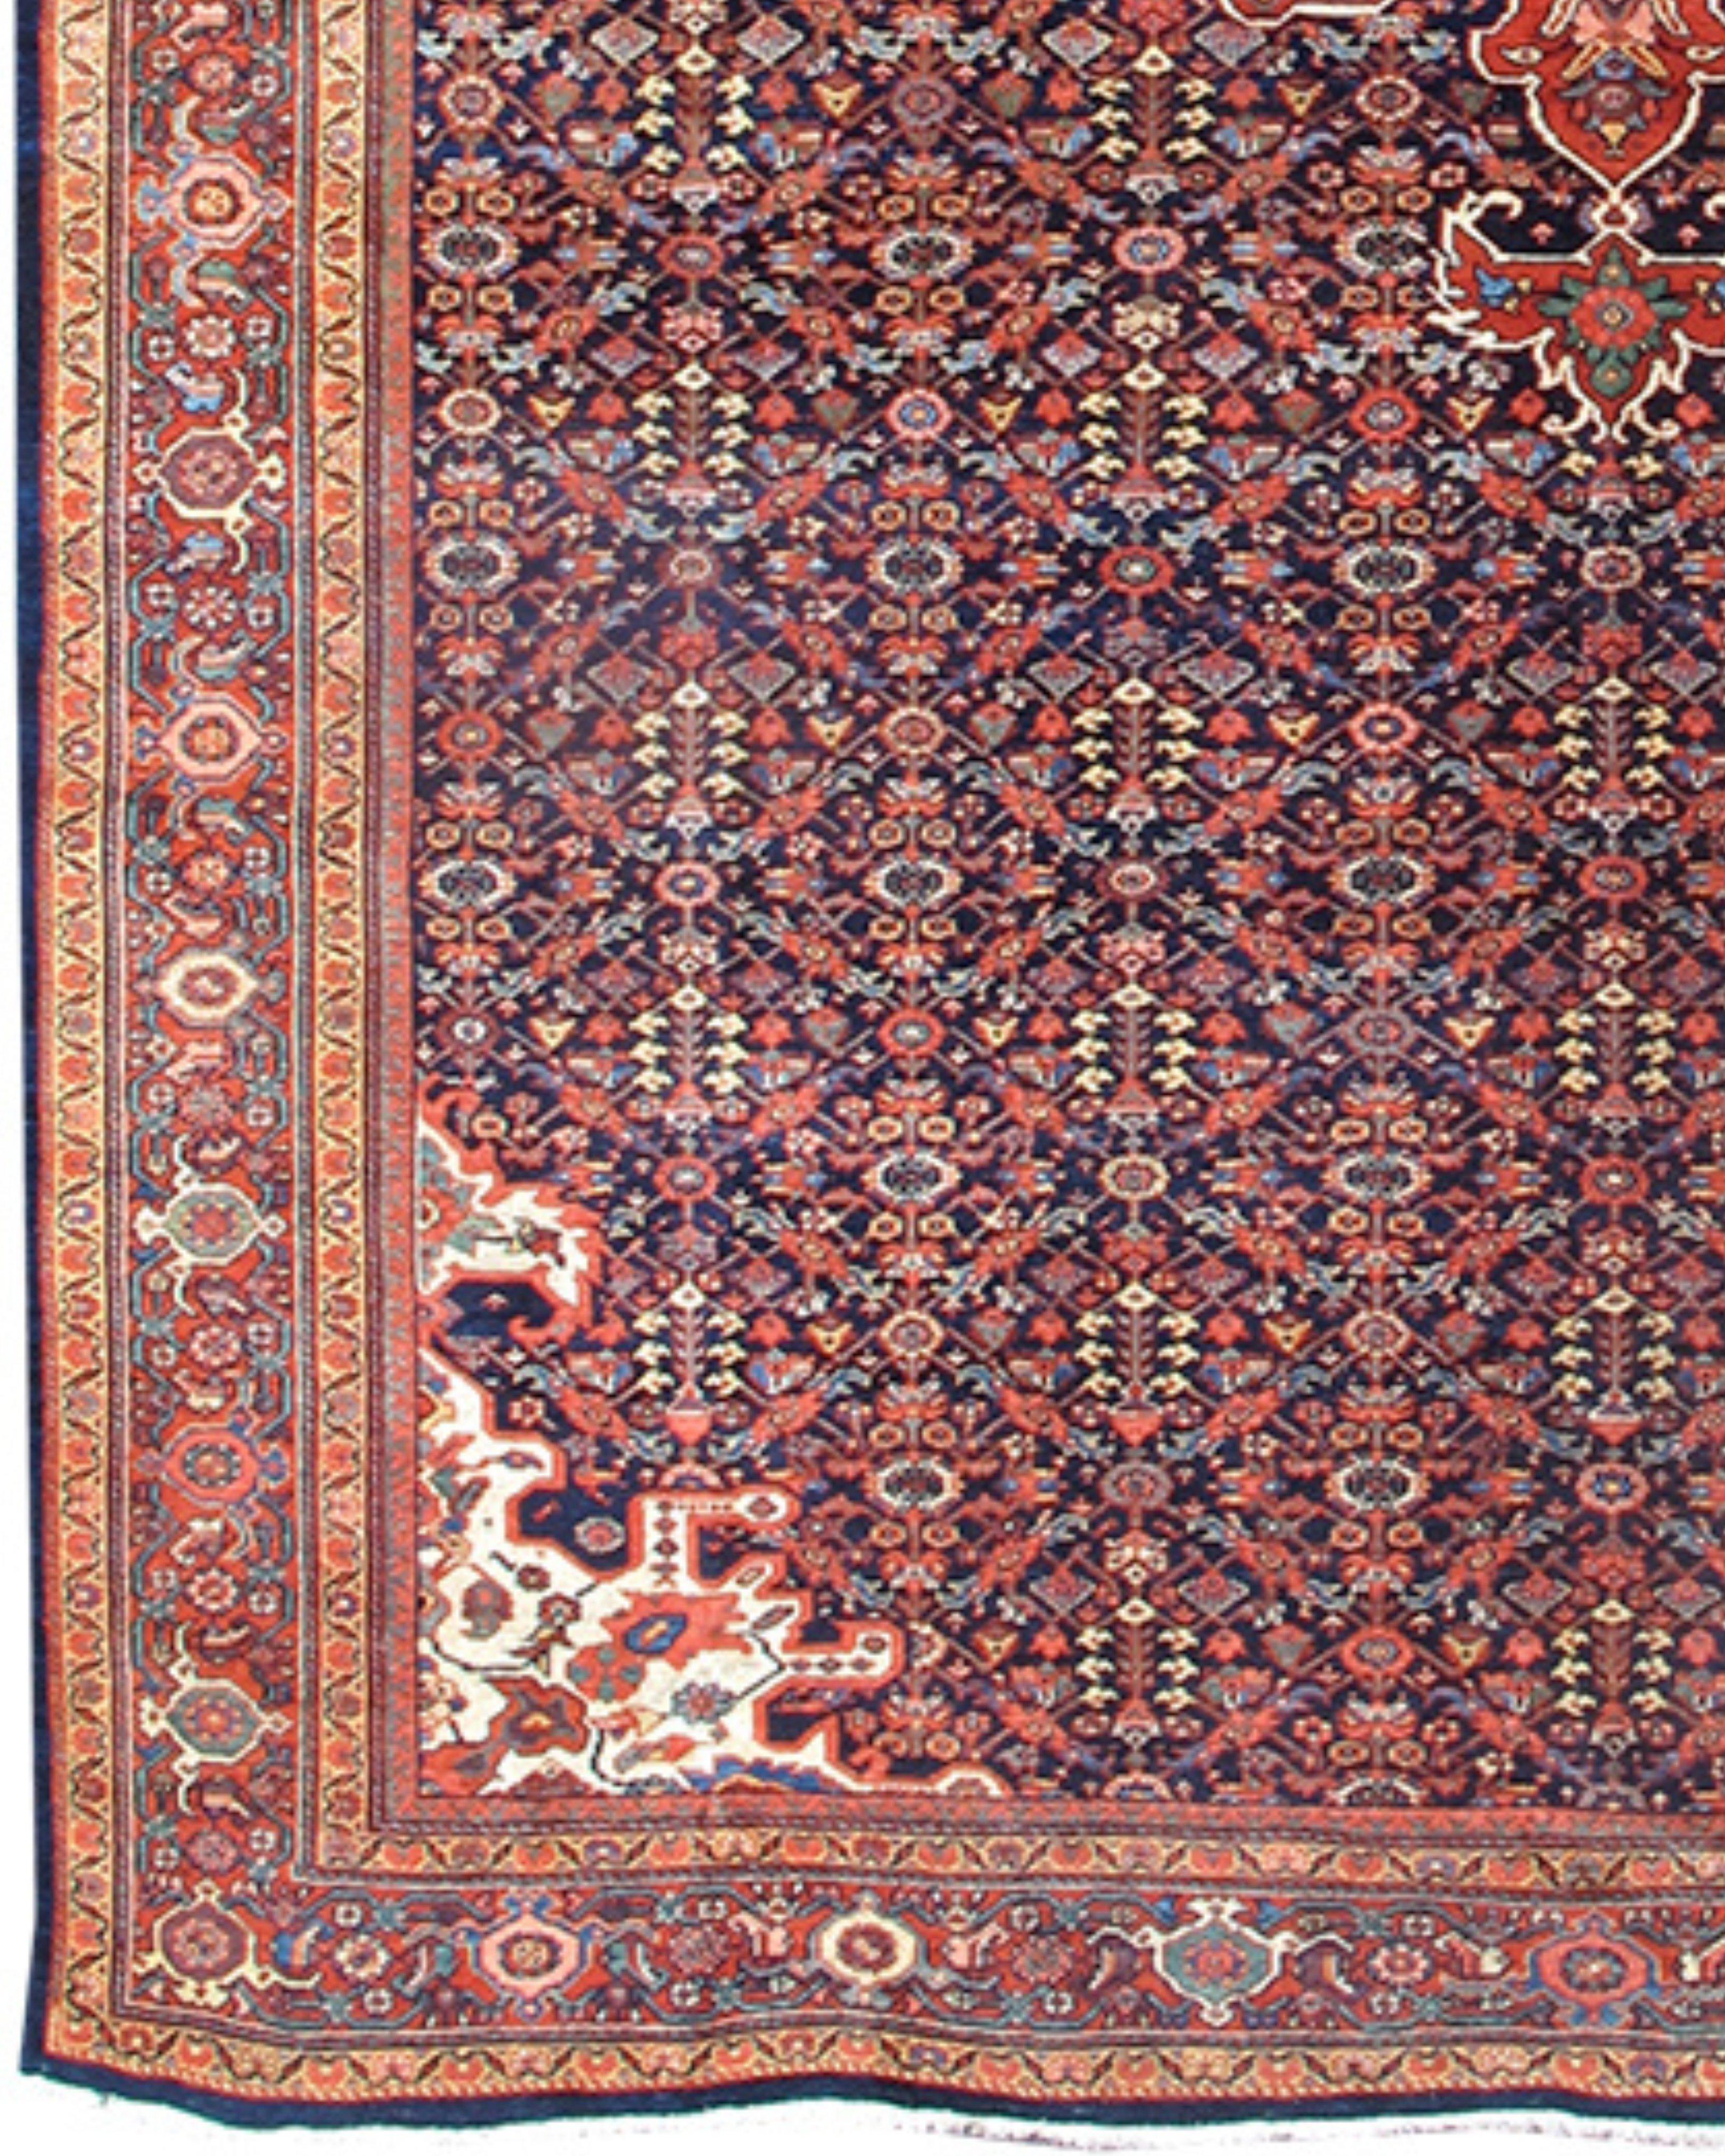 Antique Persian Fereghan Sarouk Rug, Late 19th Century

Central pendant medallion on a midnight blue field with gul Hannae pattern within a madder palmette and vine border.

Additional Information:
Dimensions: 6'11